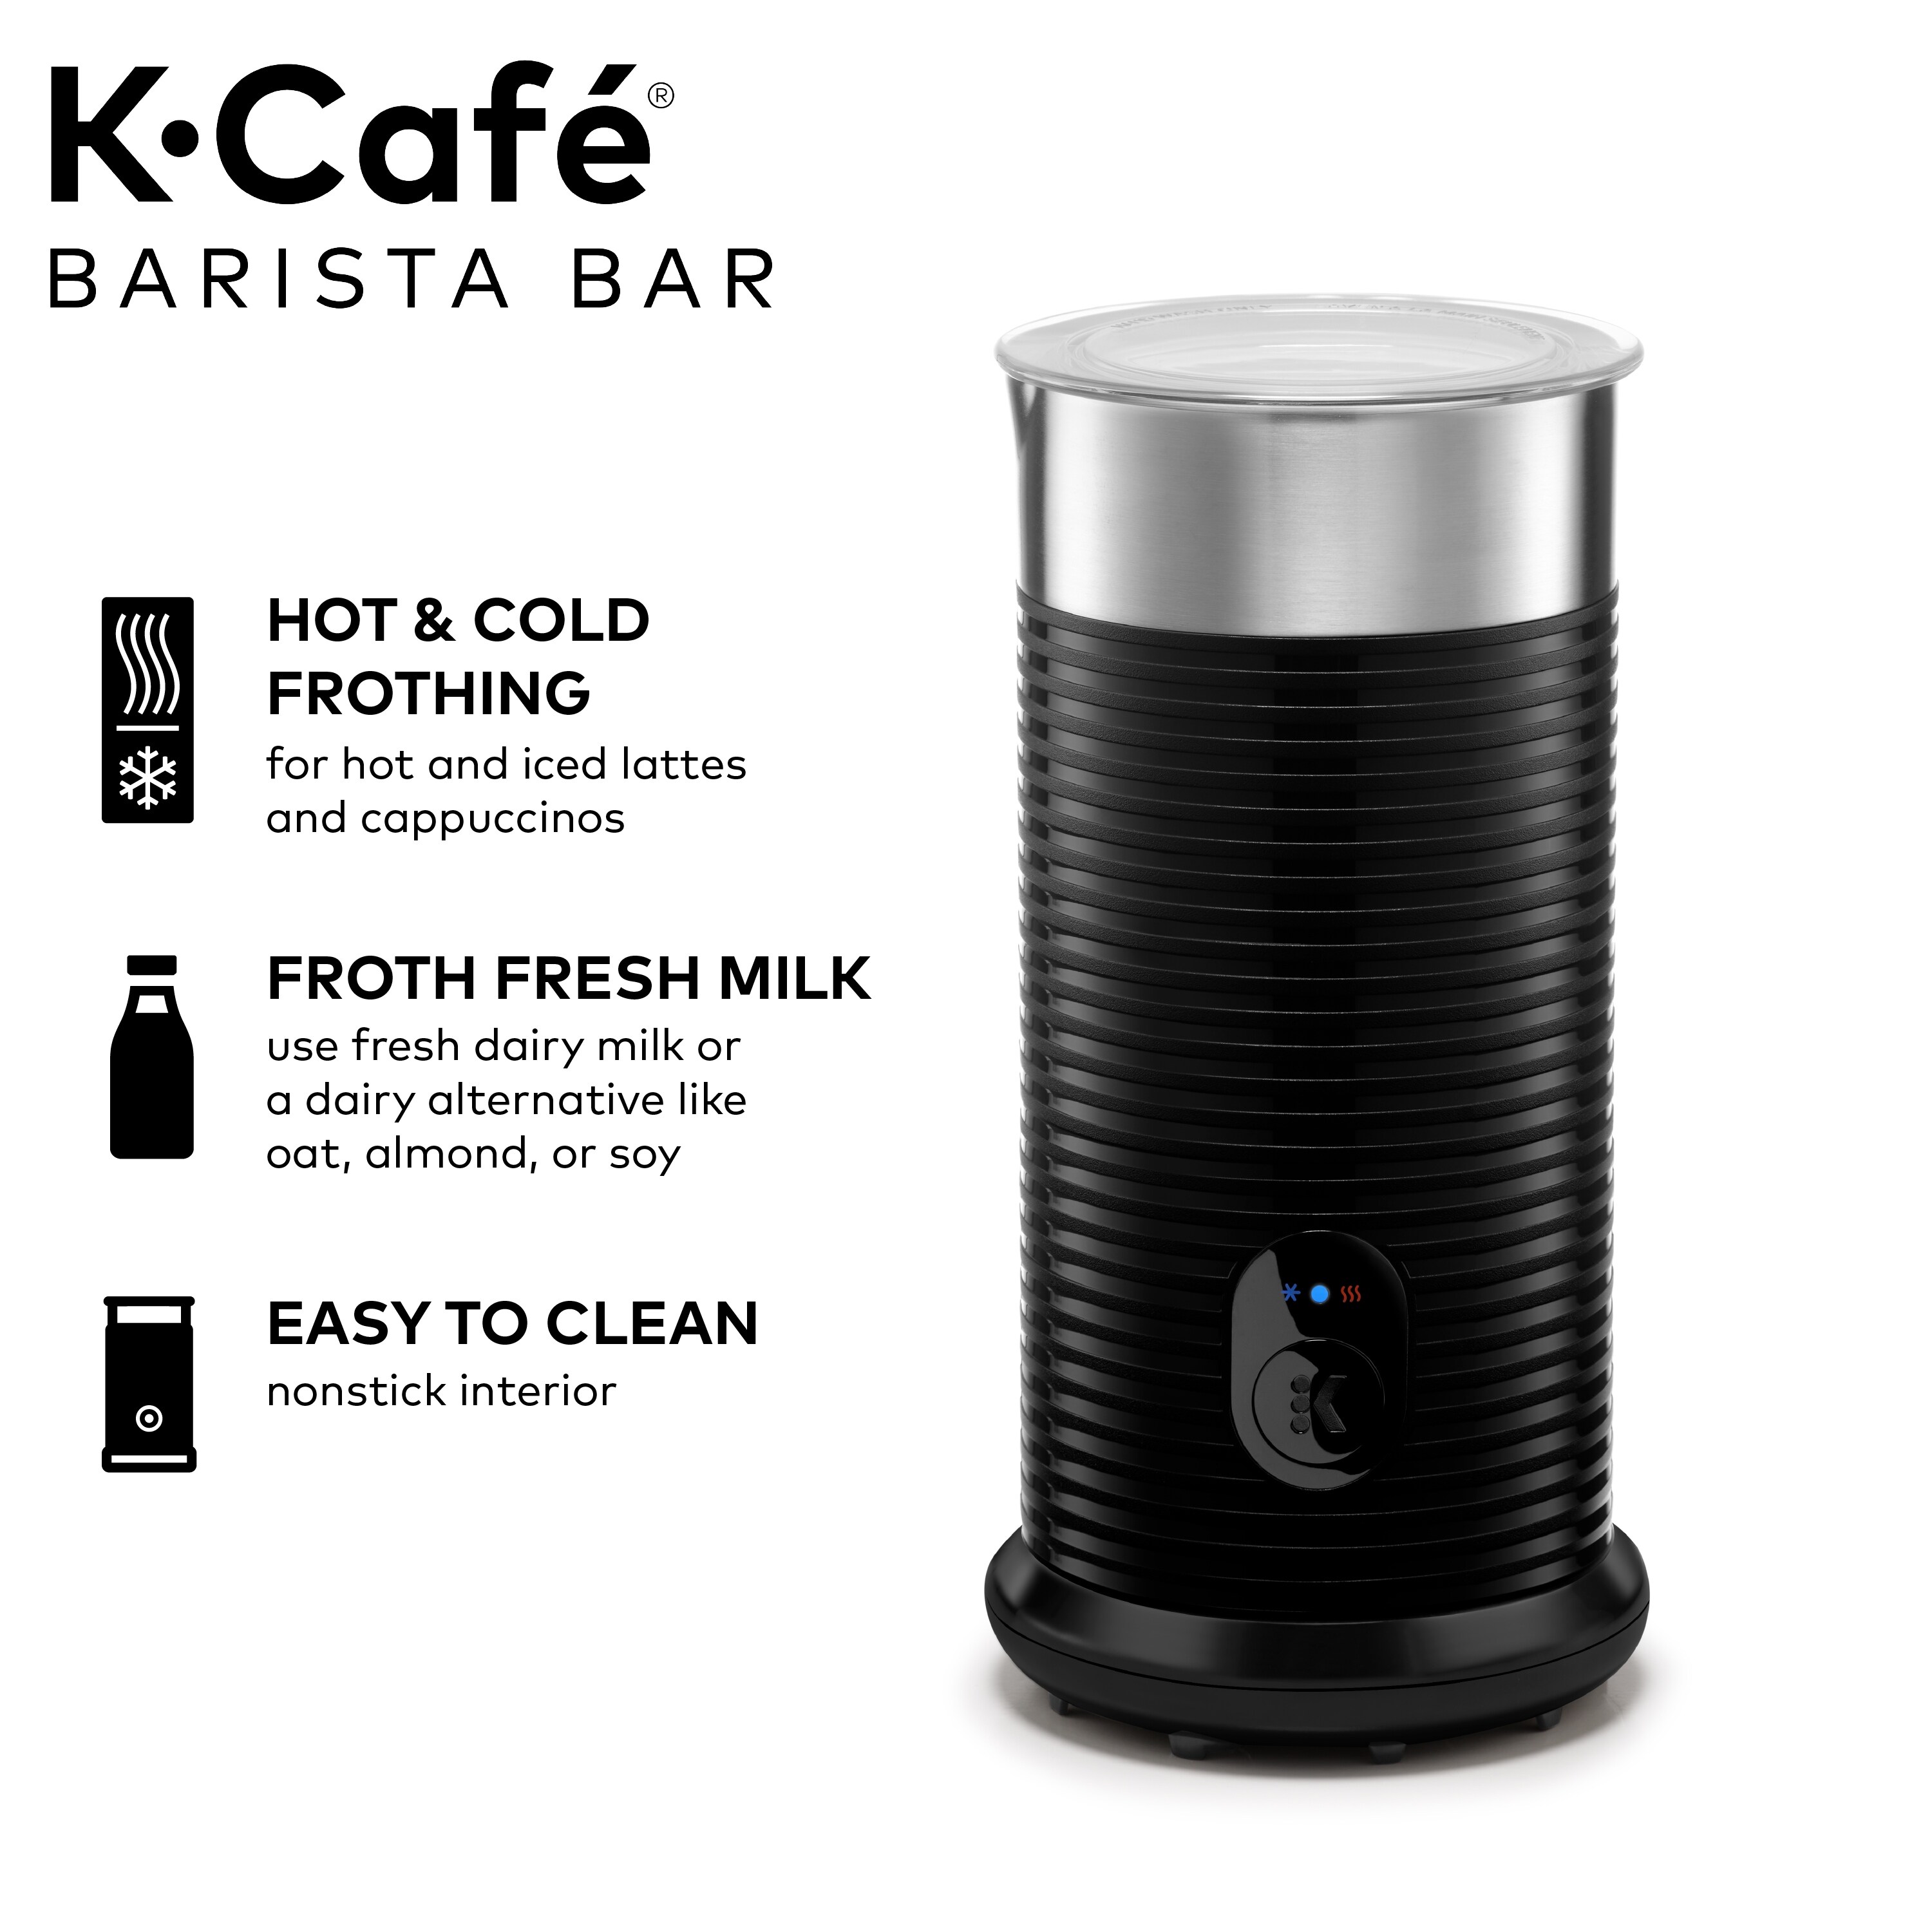 https://ak1.ostkcdn.com/images/products/is/images/direct/919d5f35147b728163947308d765c82a0b17d8b9/Keurig%C2%AE-K-Caf%C3%A9-Barista-Bar-Single-Serve-Coffee-Maker-and-Frother.jpg